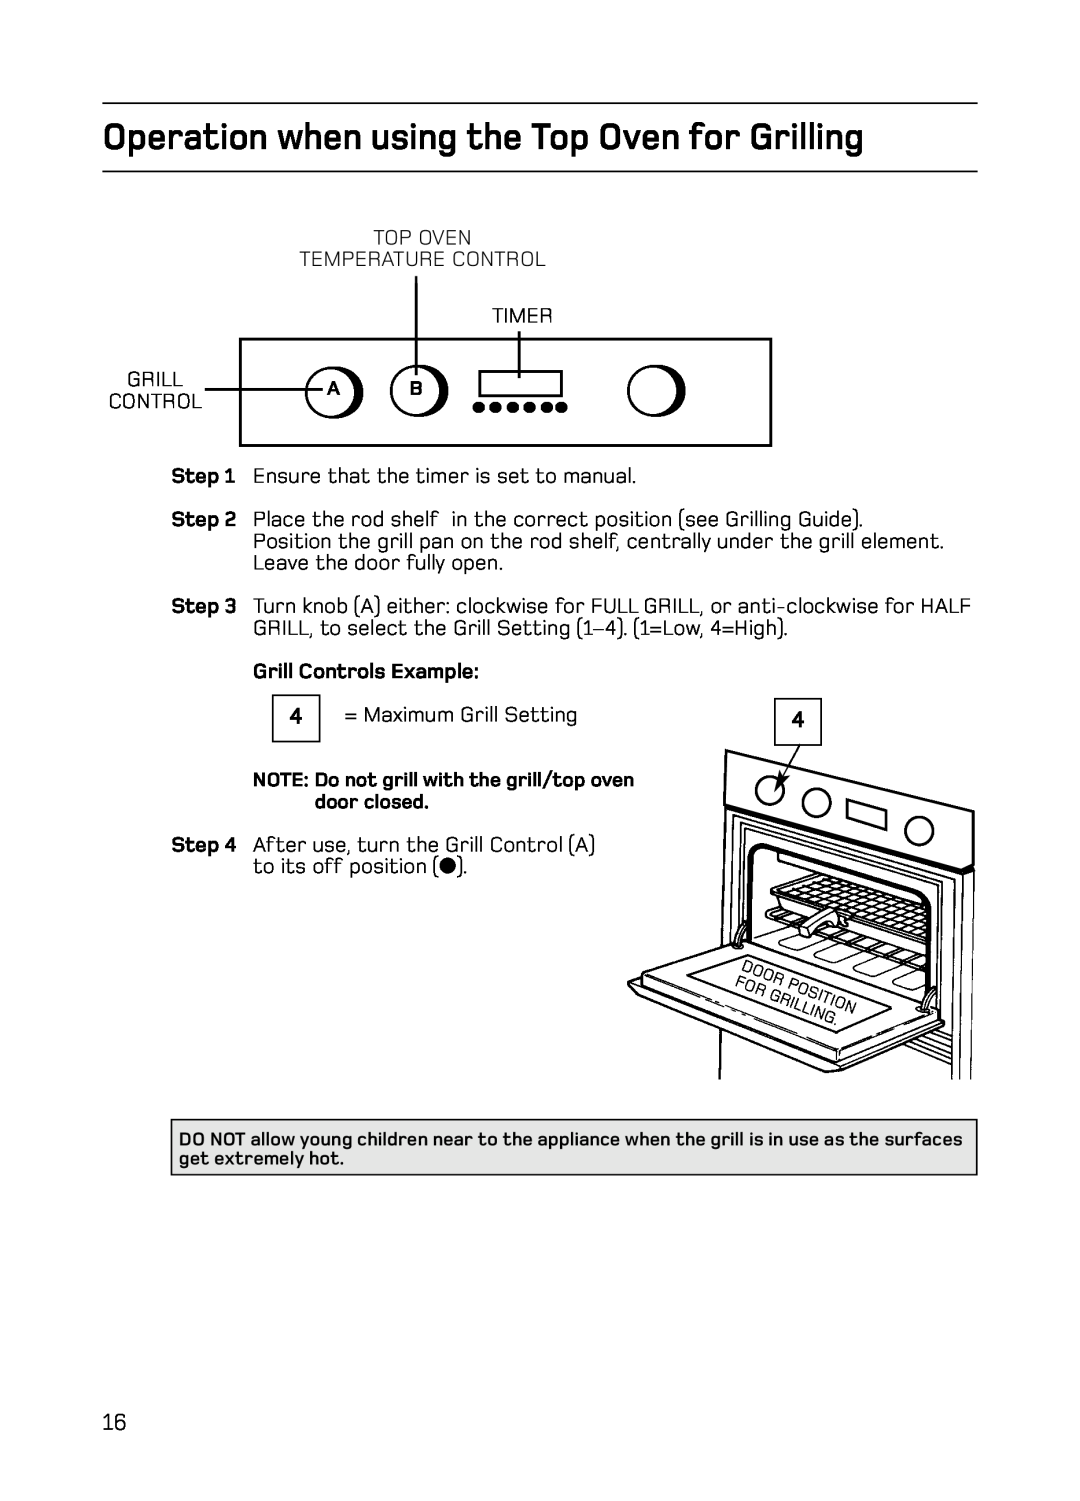 Hotpoint S130E Mk2 manual Operation when using the Top Oven for Grilling, Step, Grill Controls Example 